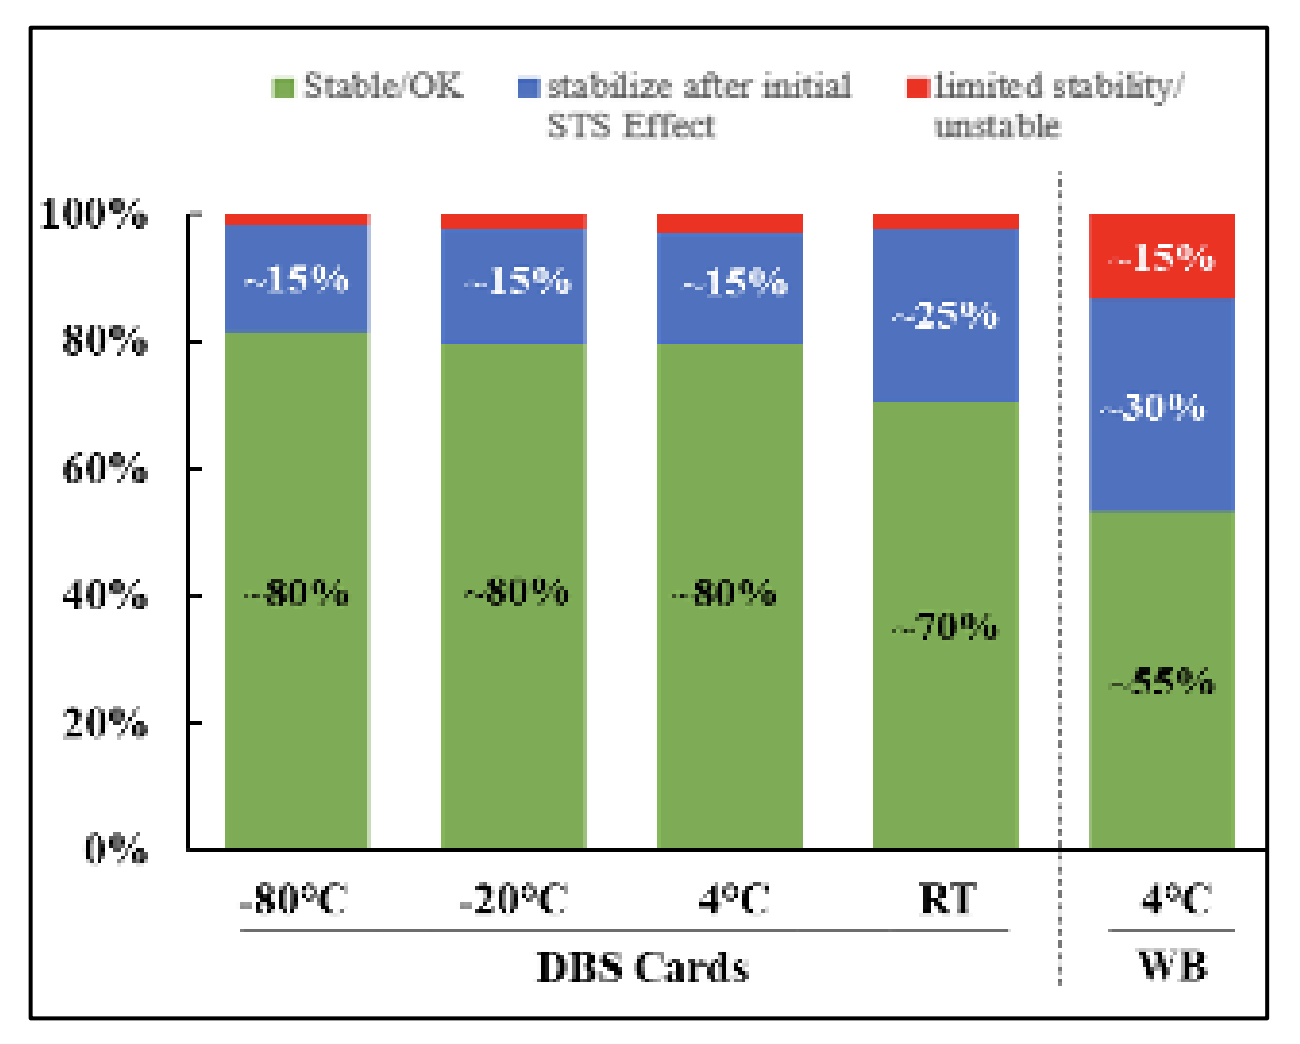 Stability of Whatman Dried Blood Spot Cards